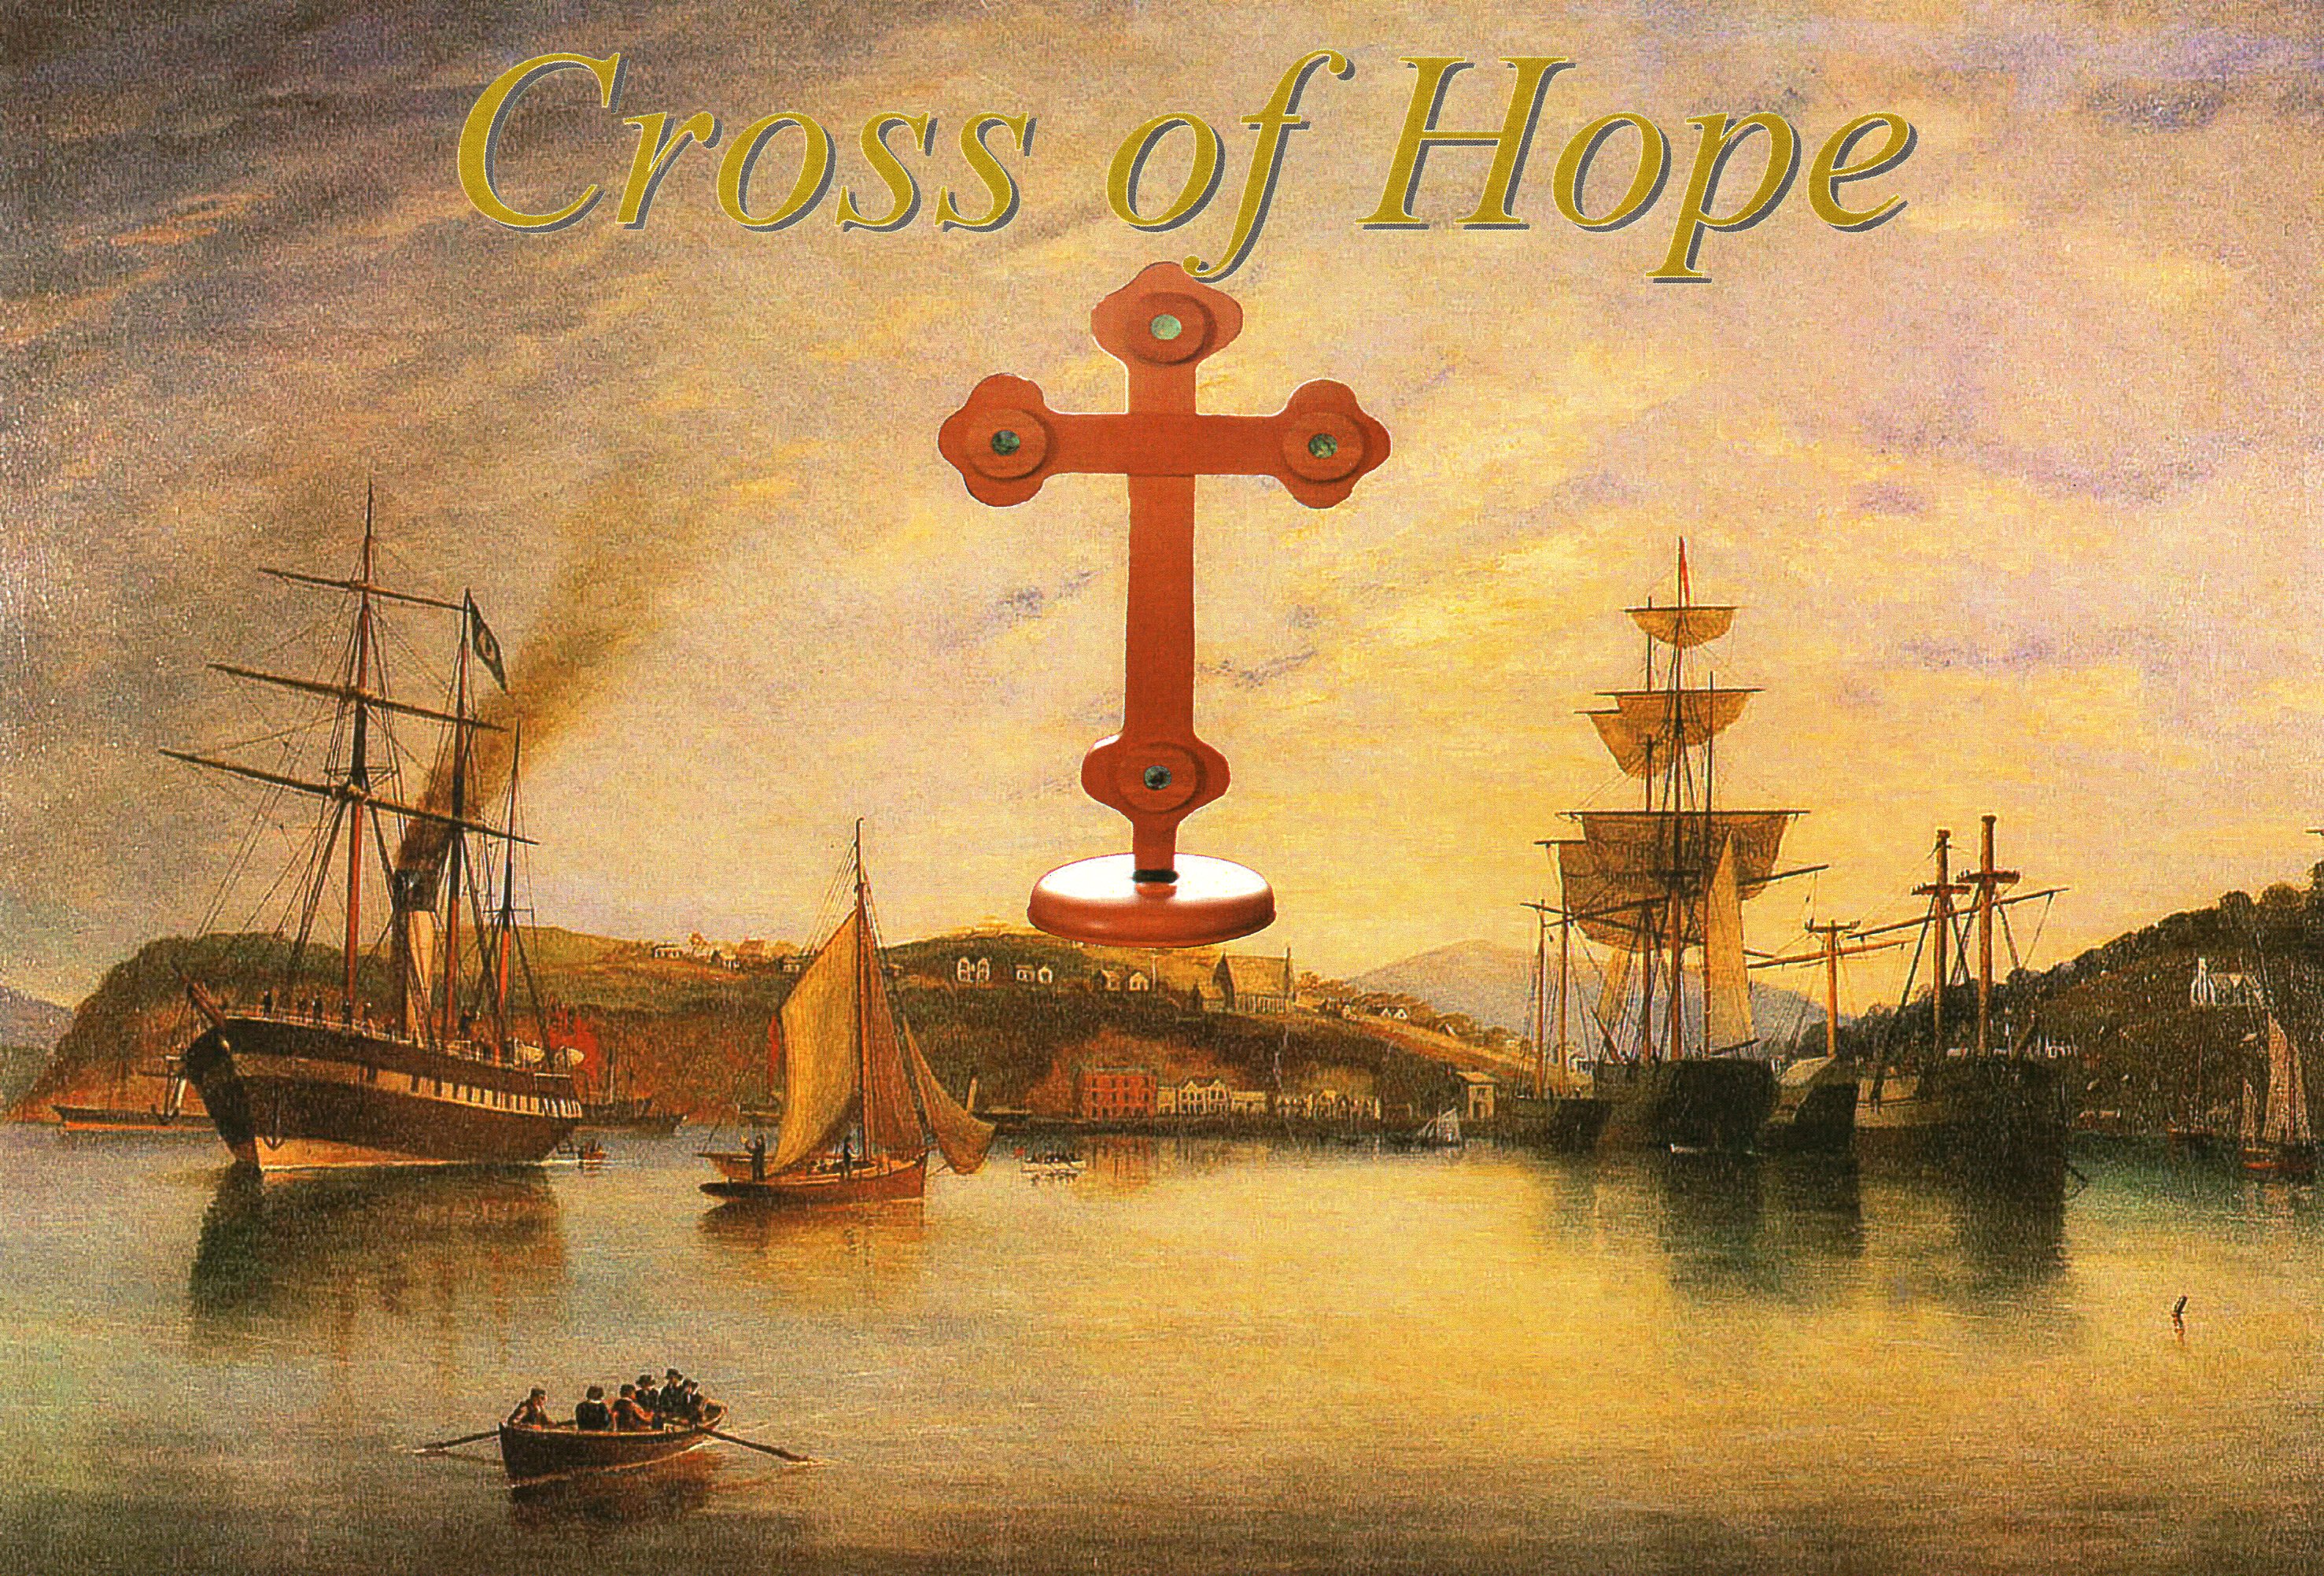 The cross 
superimposed on an old photograph of Otago Harbour